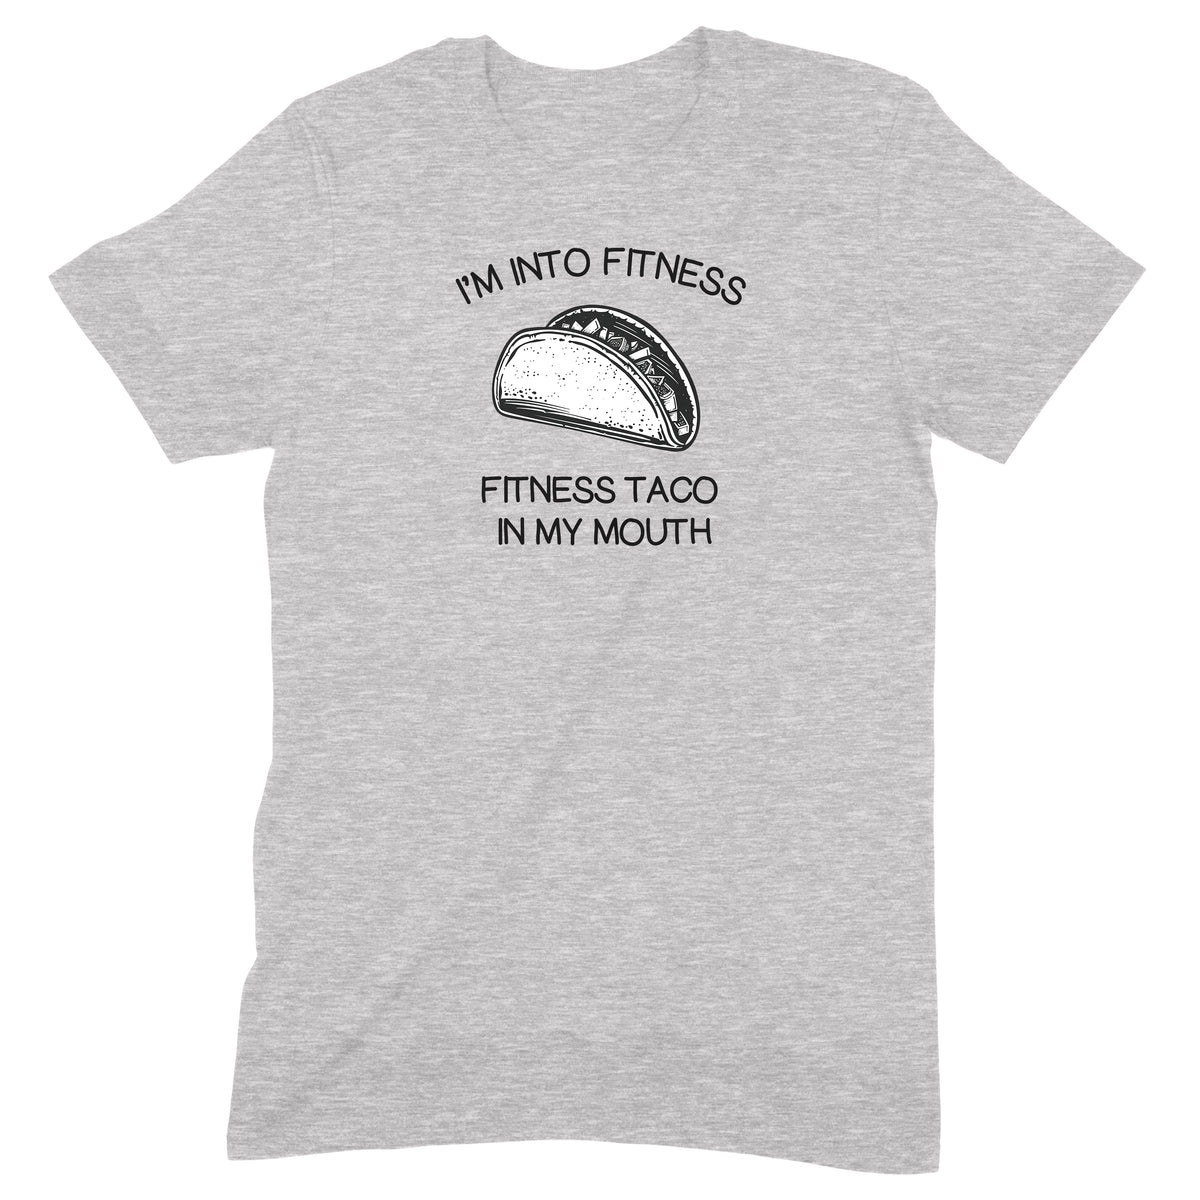 "Into Fitness" Premium Midweight Ringspun Cotton T-Shirt - Mens/Womens Fits